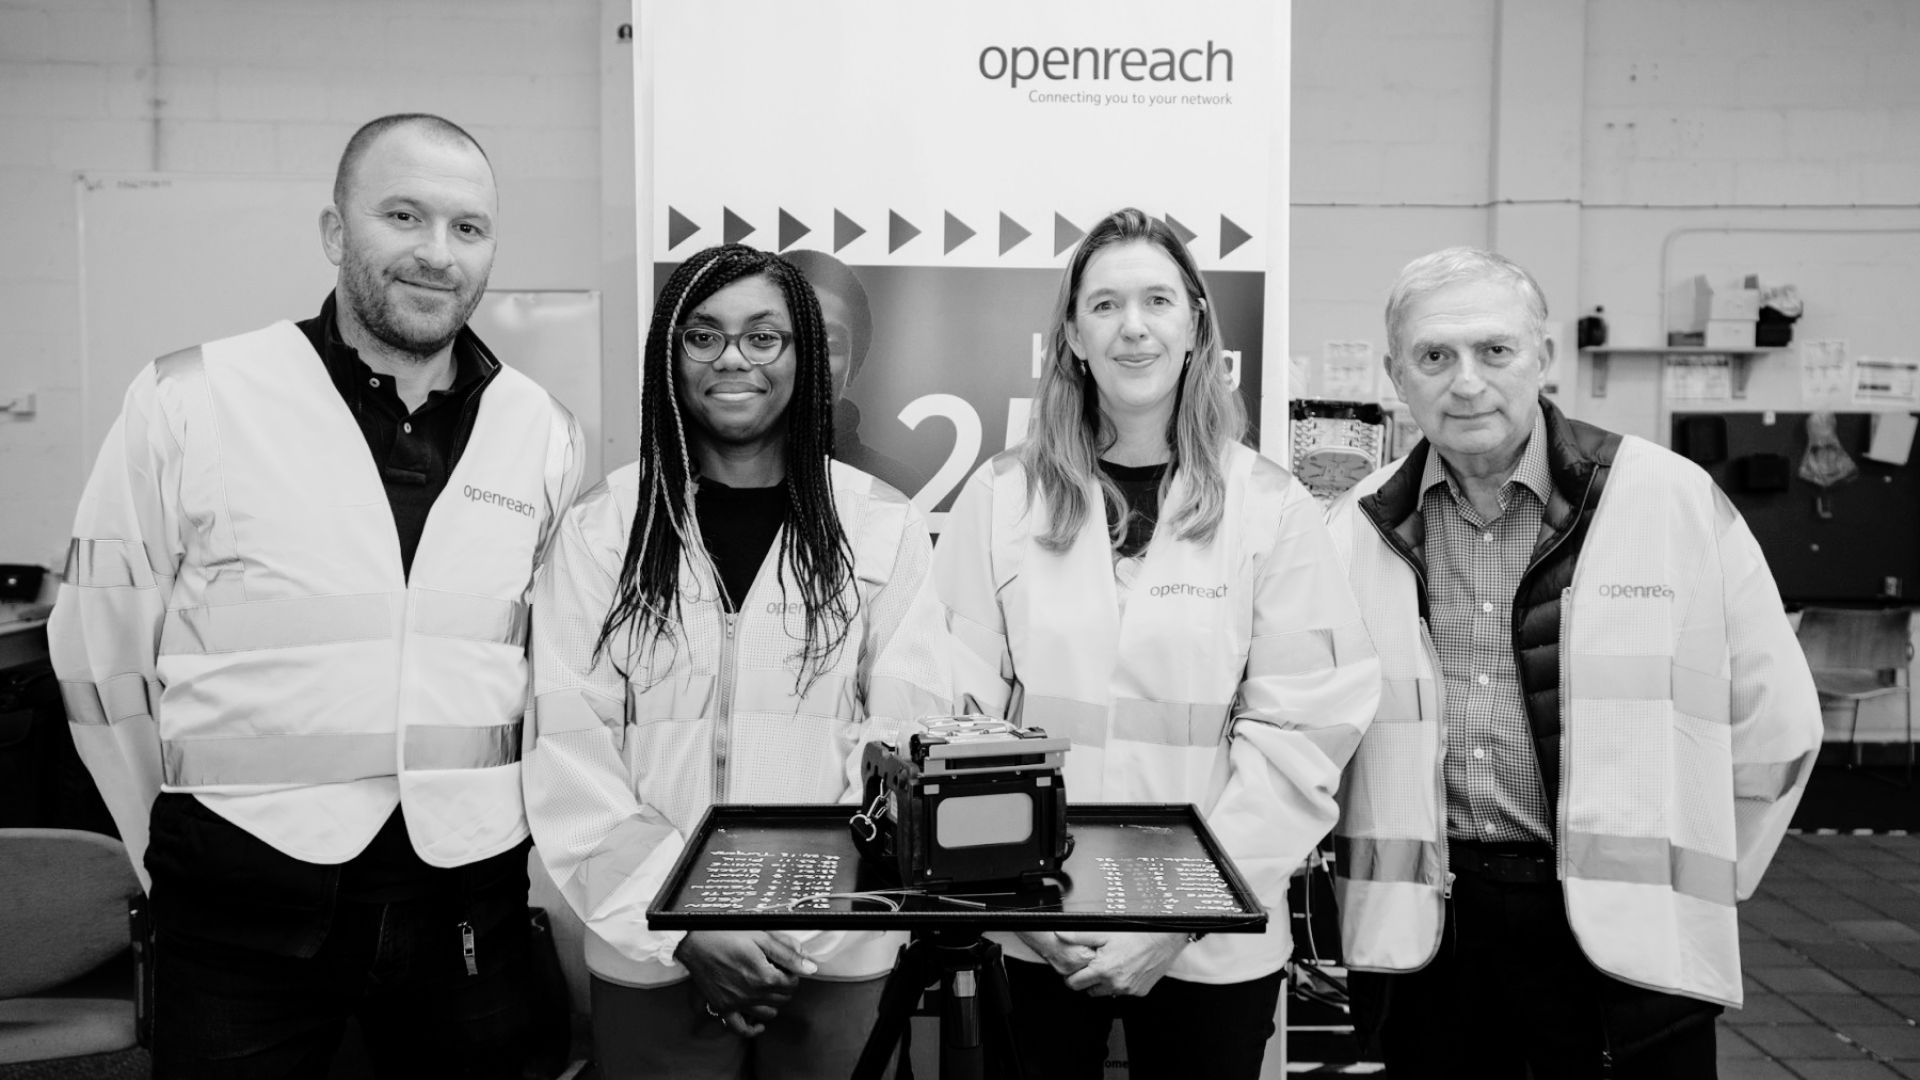 Openreach and Superfast Essex Mark Completion of Broadband Partnership in Great Dunmow